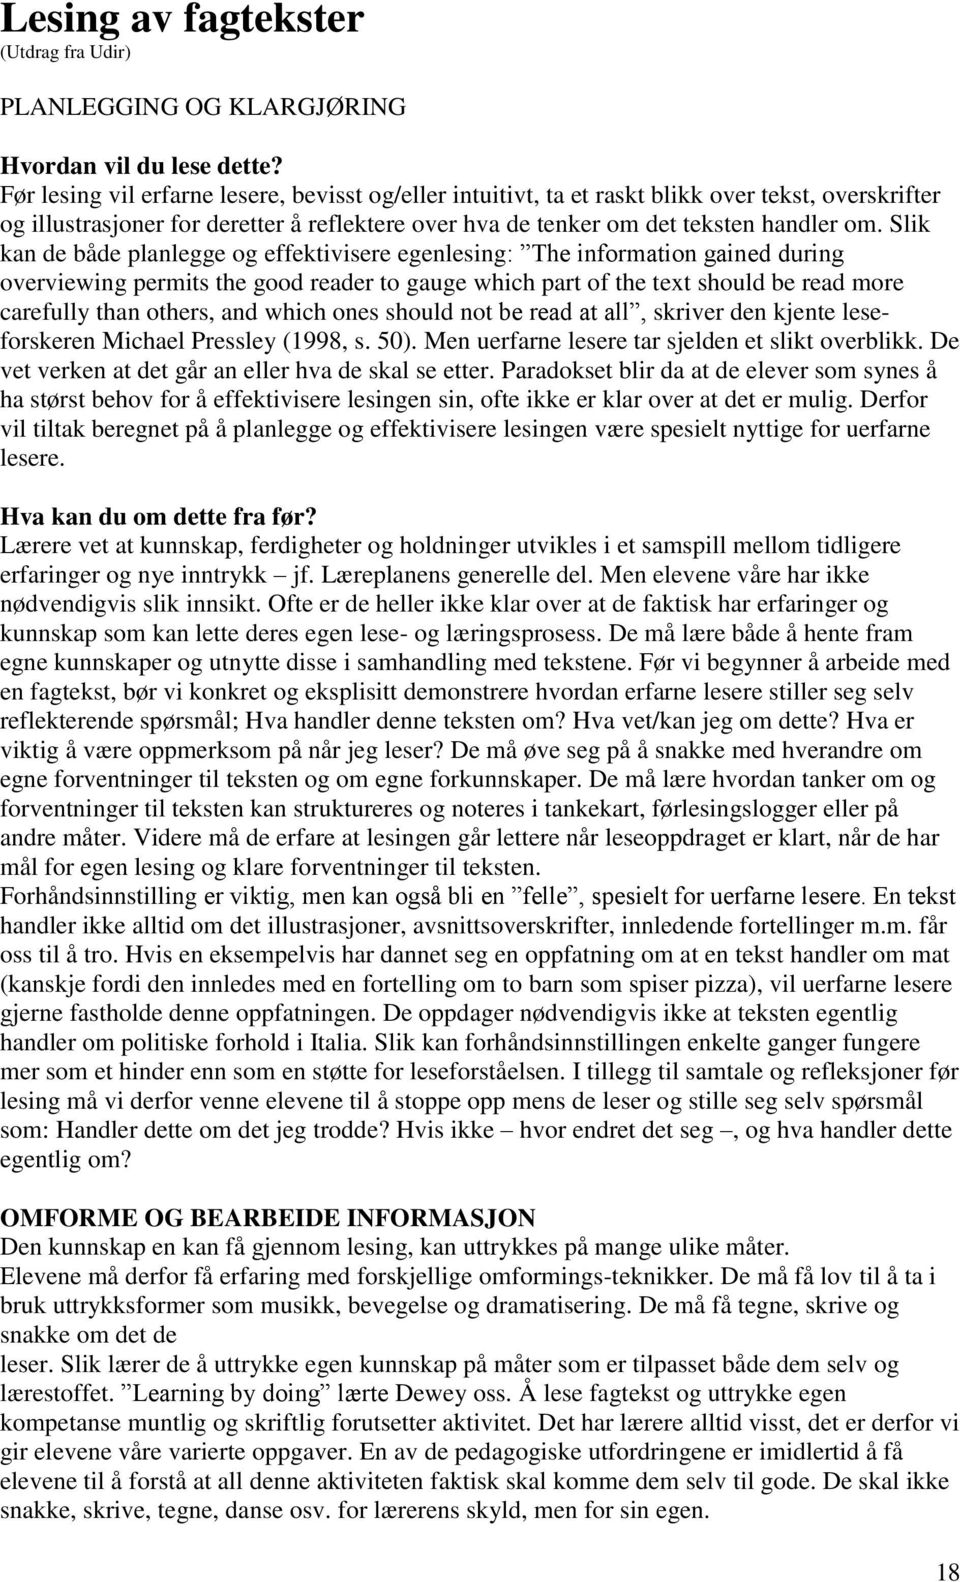 Slik kan de både planlegge og effektivisere egenlesing: The information gained during overviewing permits the good reader to gauge which part of the text should be read more carefully than others,